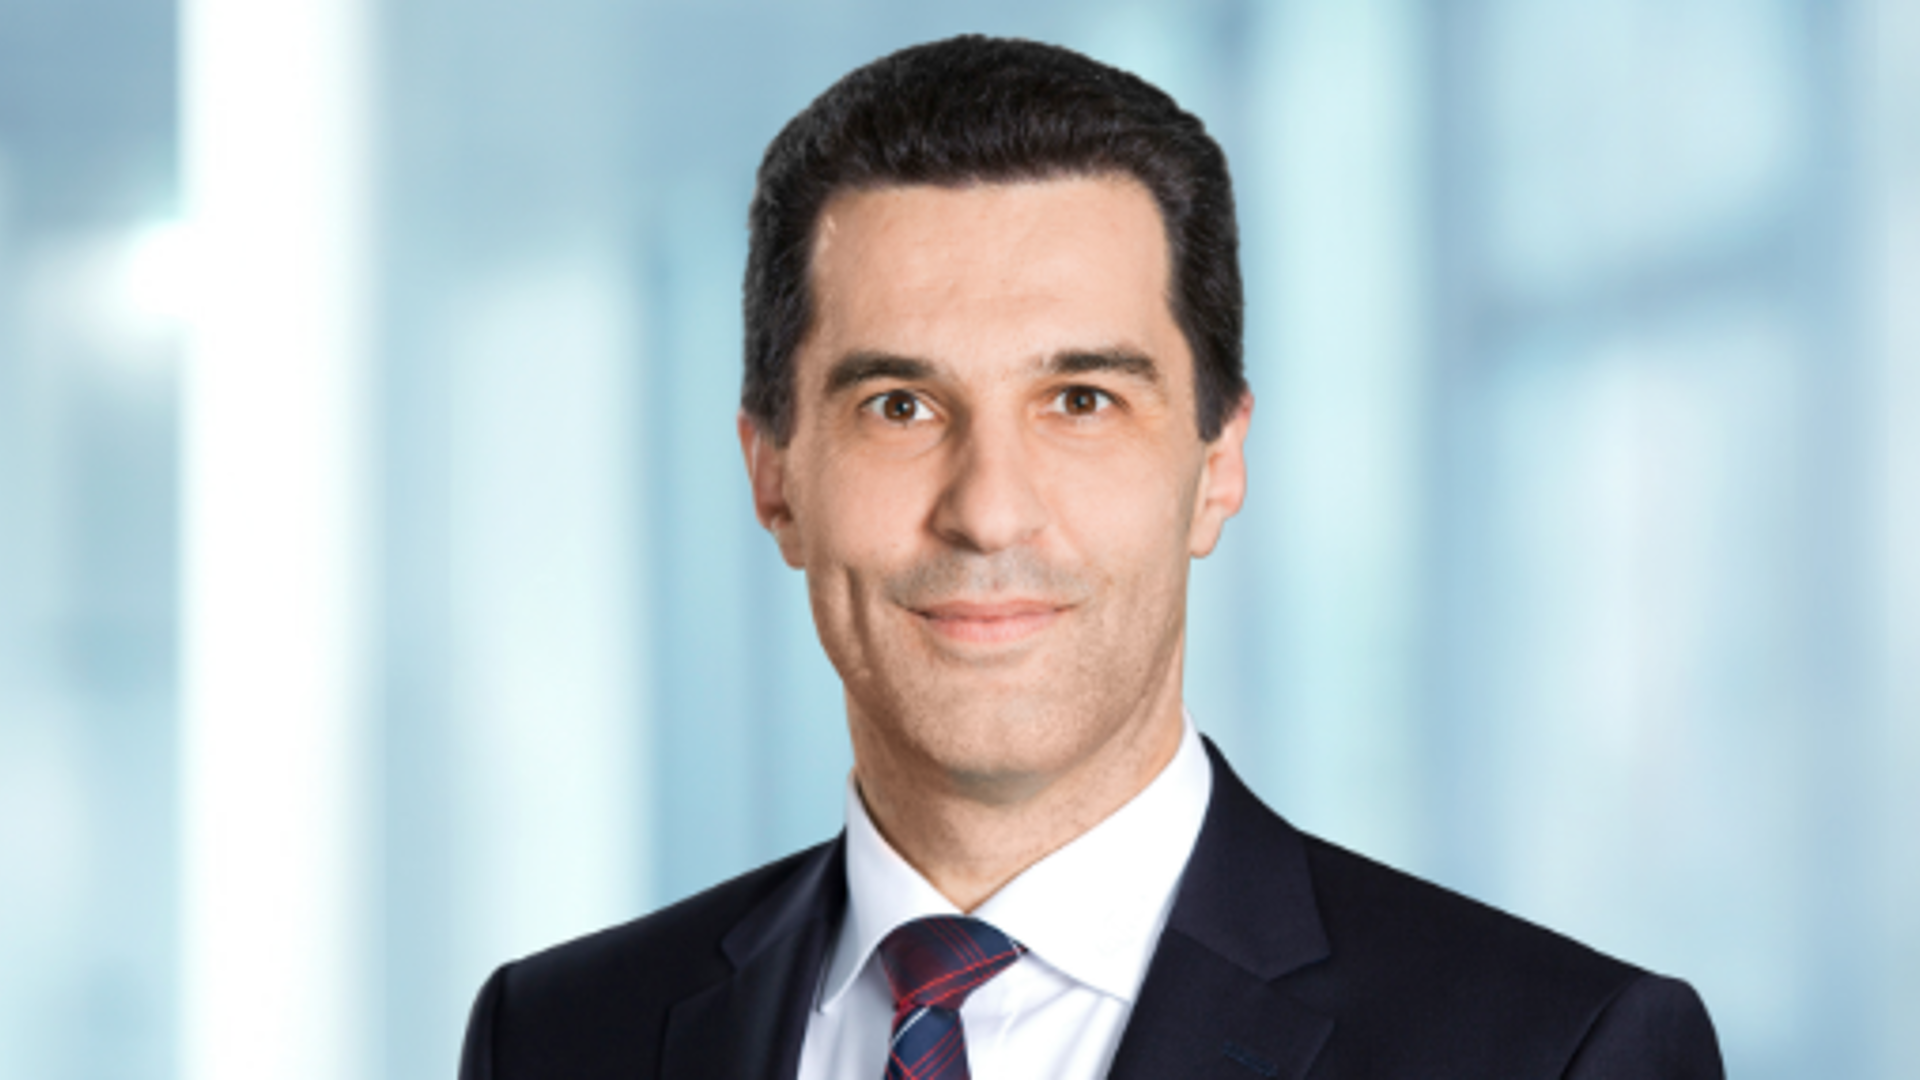 Portrait of Matthäus Englbrecht, Vice President Global Brake Systems at Knorr-Bremse Rail Vehicle Systems